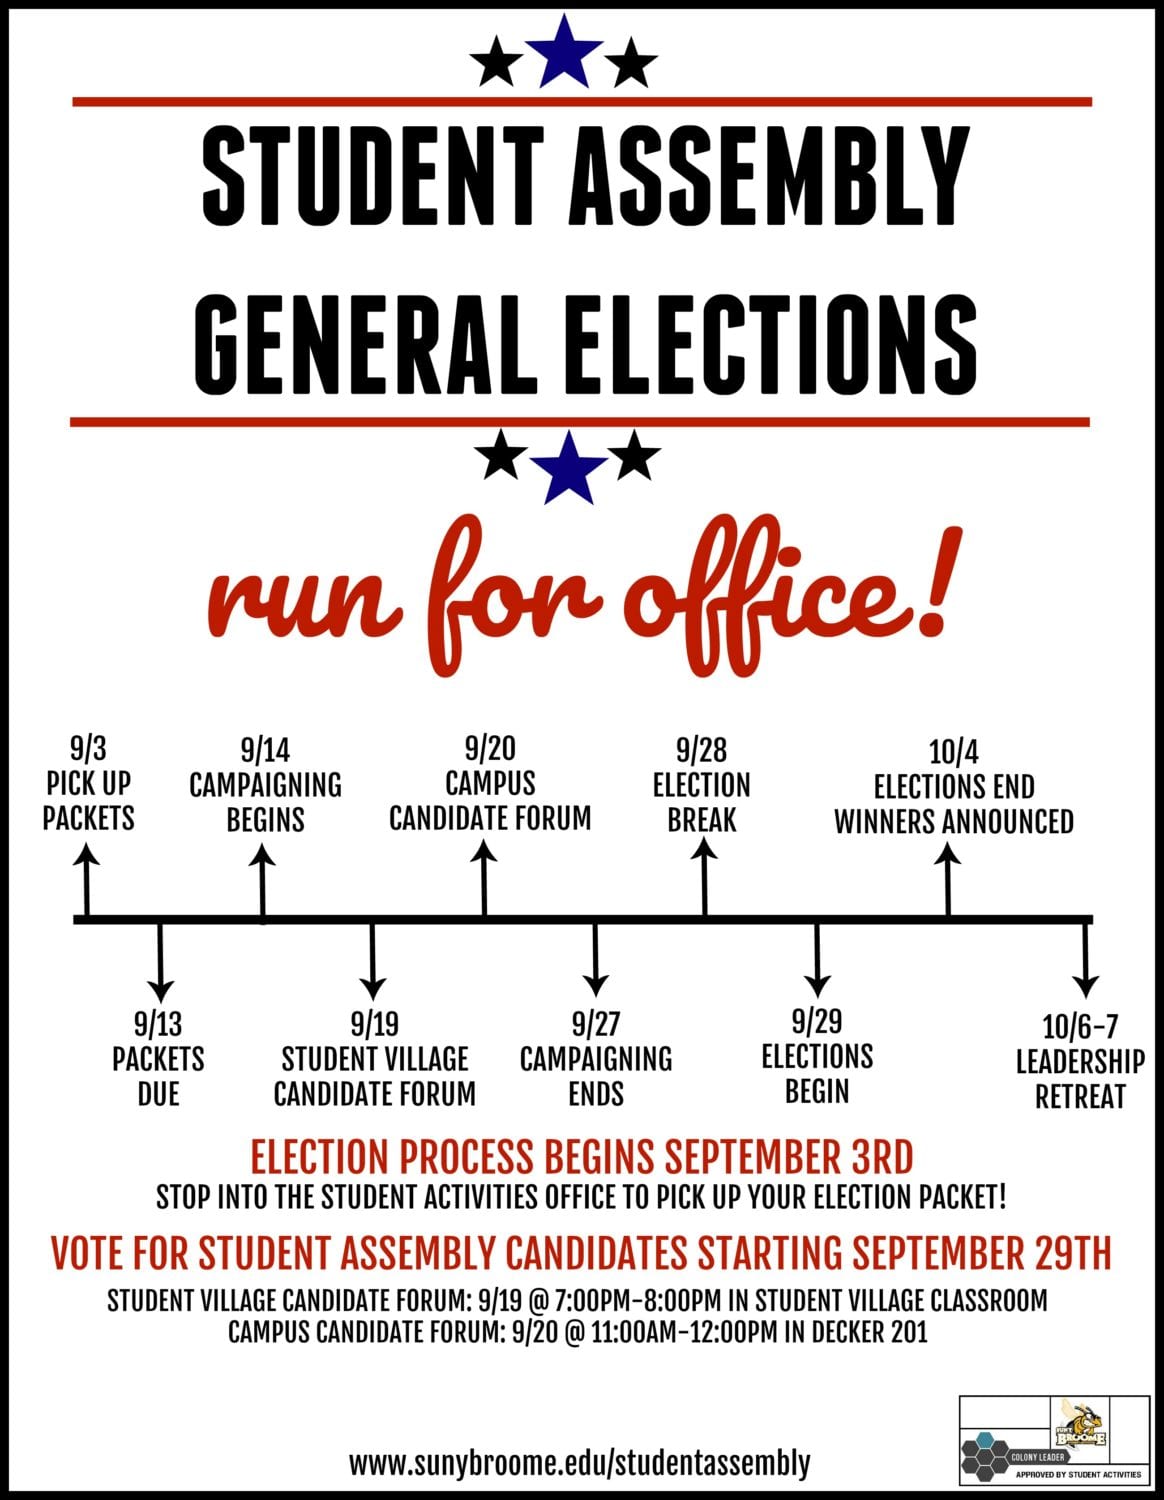 Cast your vote: Student Assembly Elections